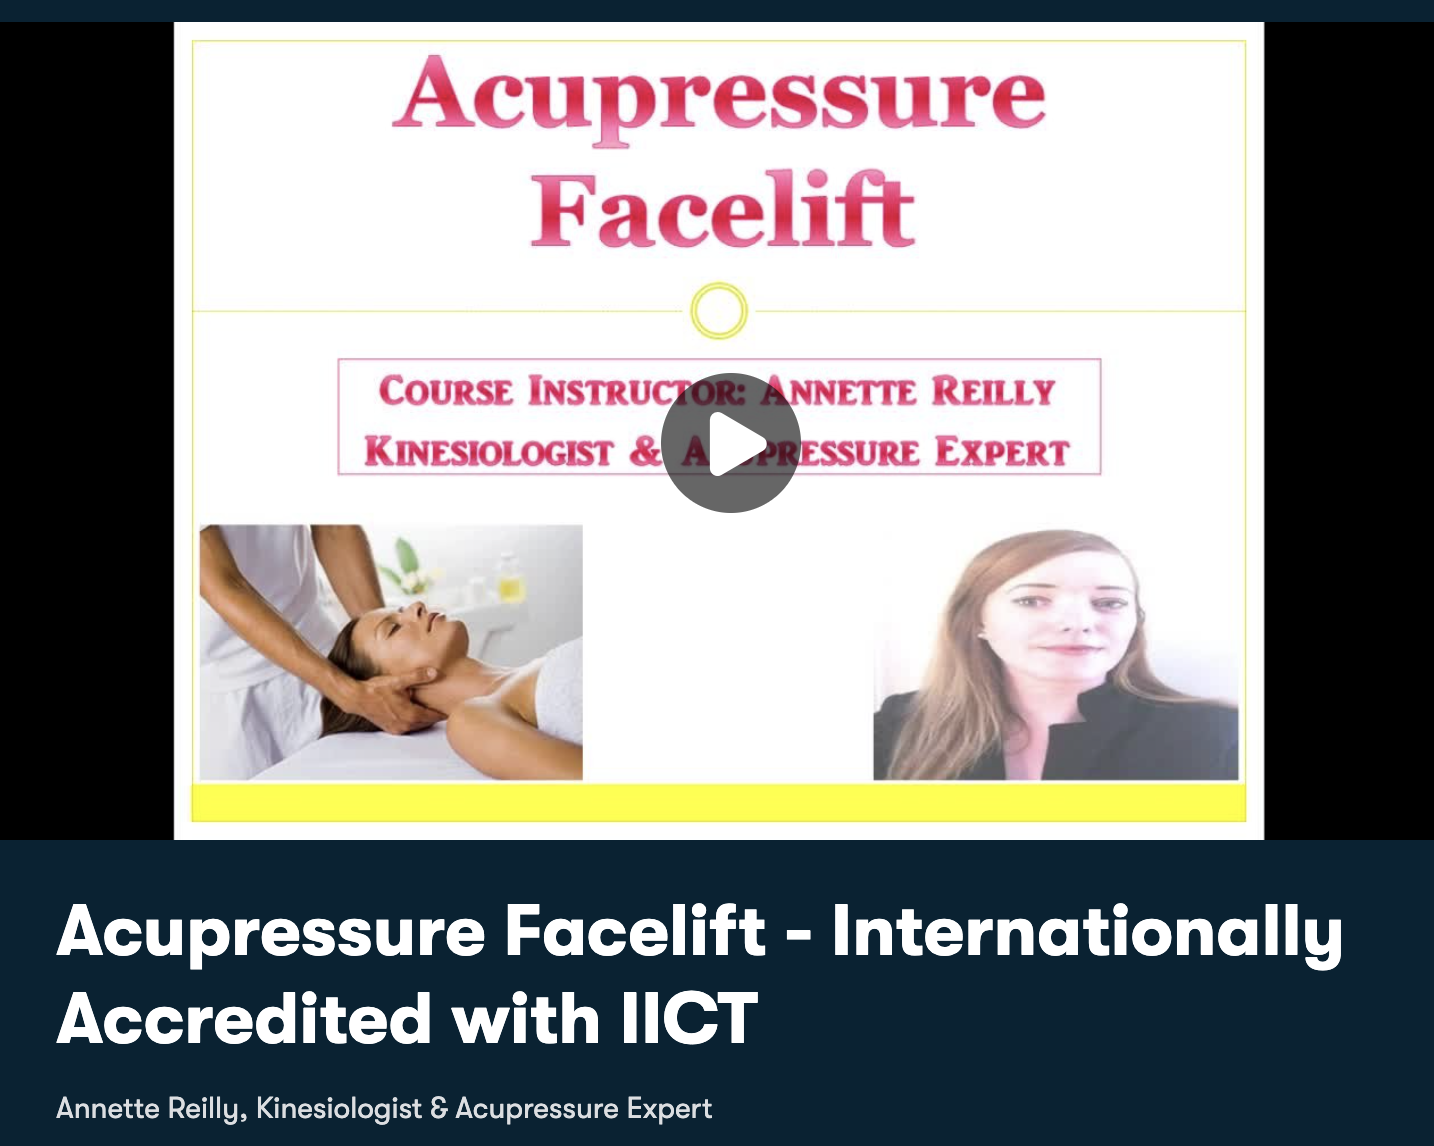 Acupressure Facelift - Internationally Accredited with IICT